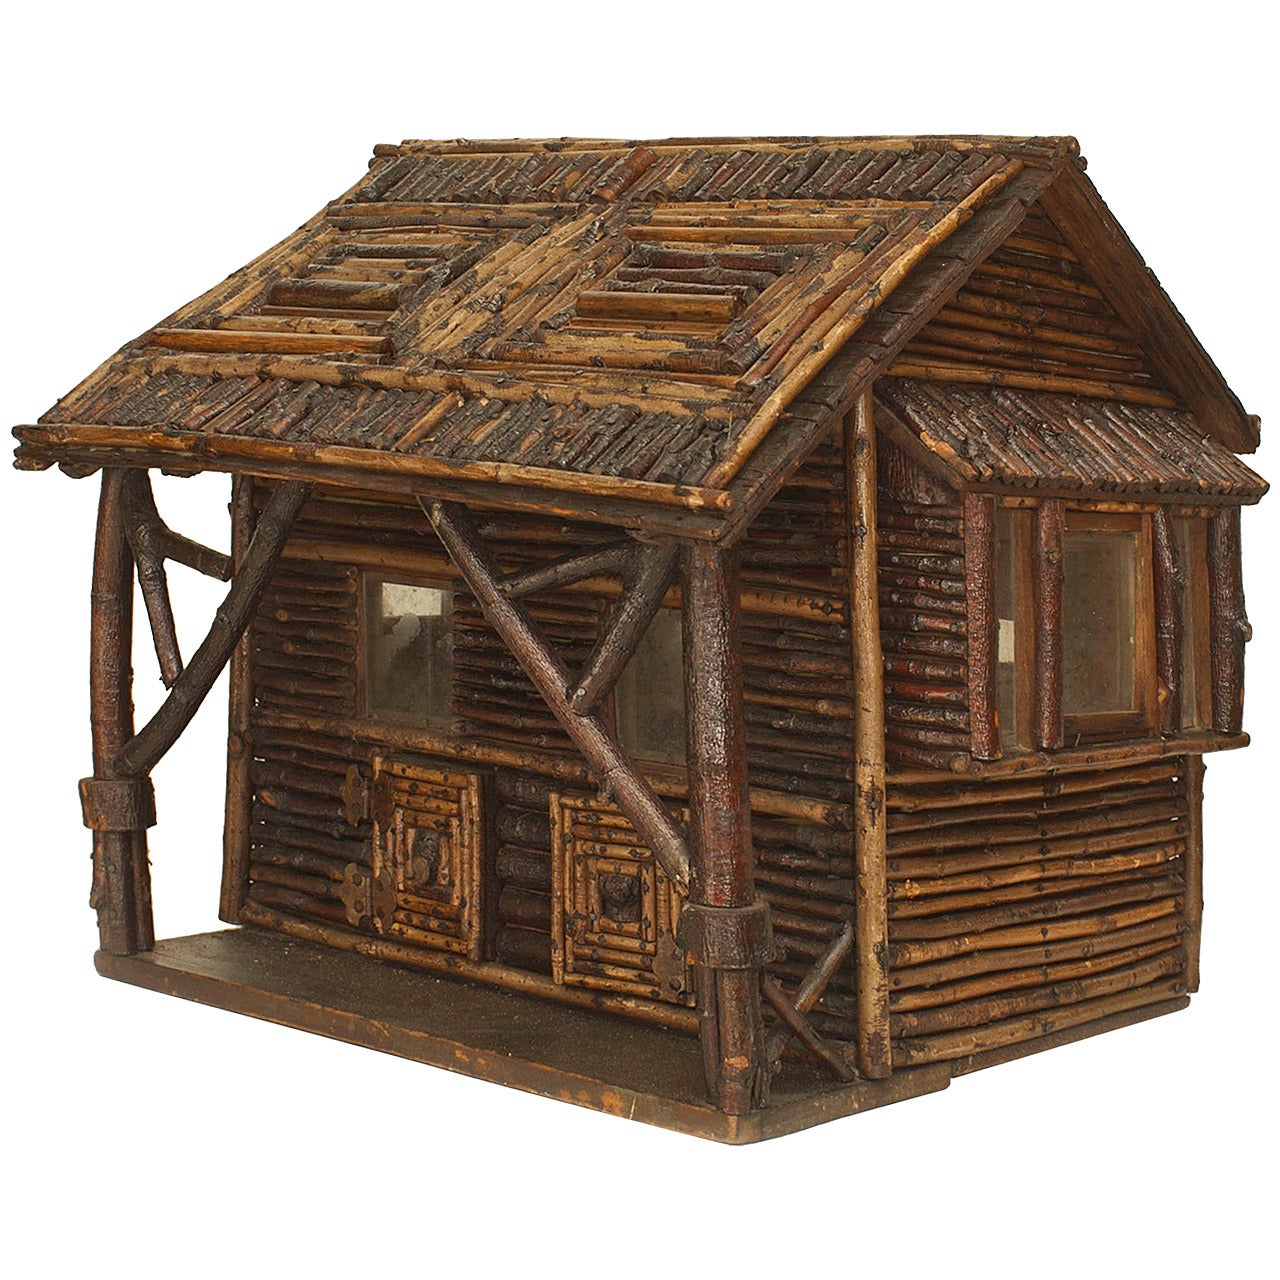 Early 20th century American rustic or Adirondack style model of a log cabin with glass windows and a porch with two doors.